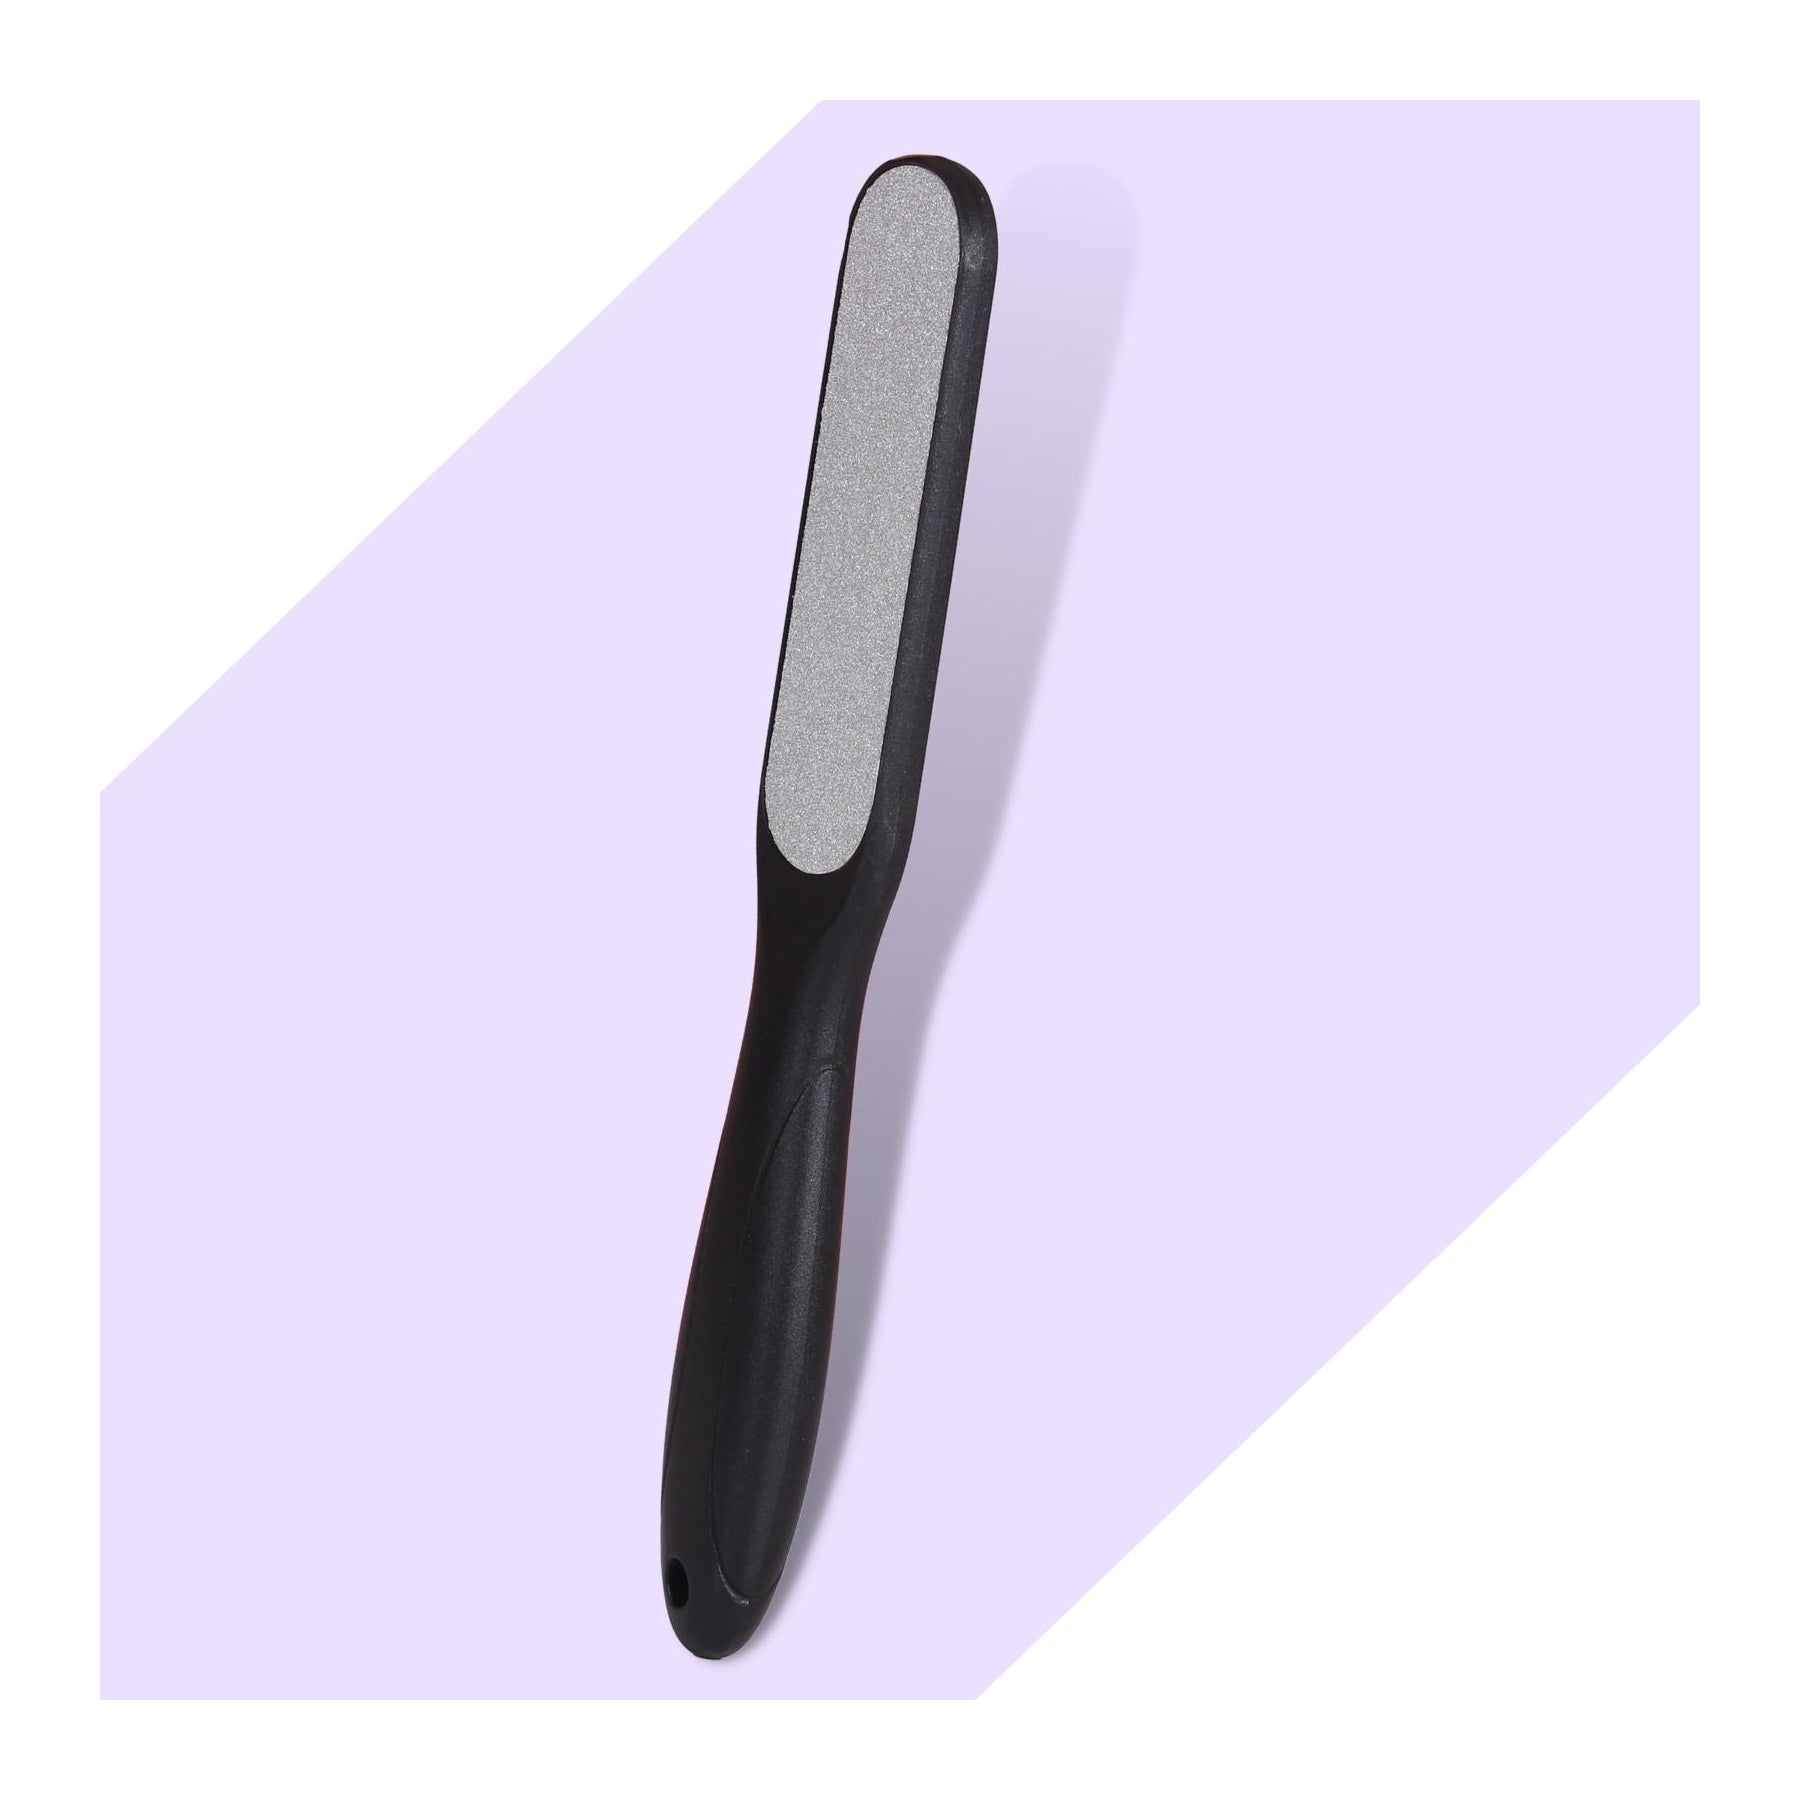 Foot File - Callus Remover Tool for Dead Skin Removal, at Home